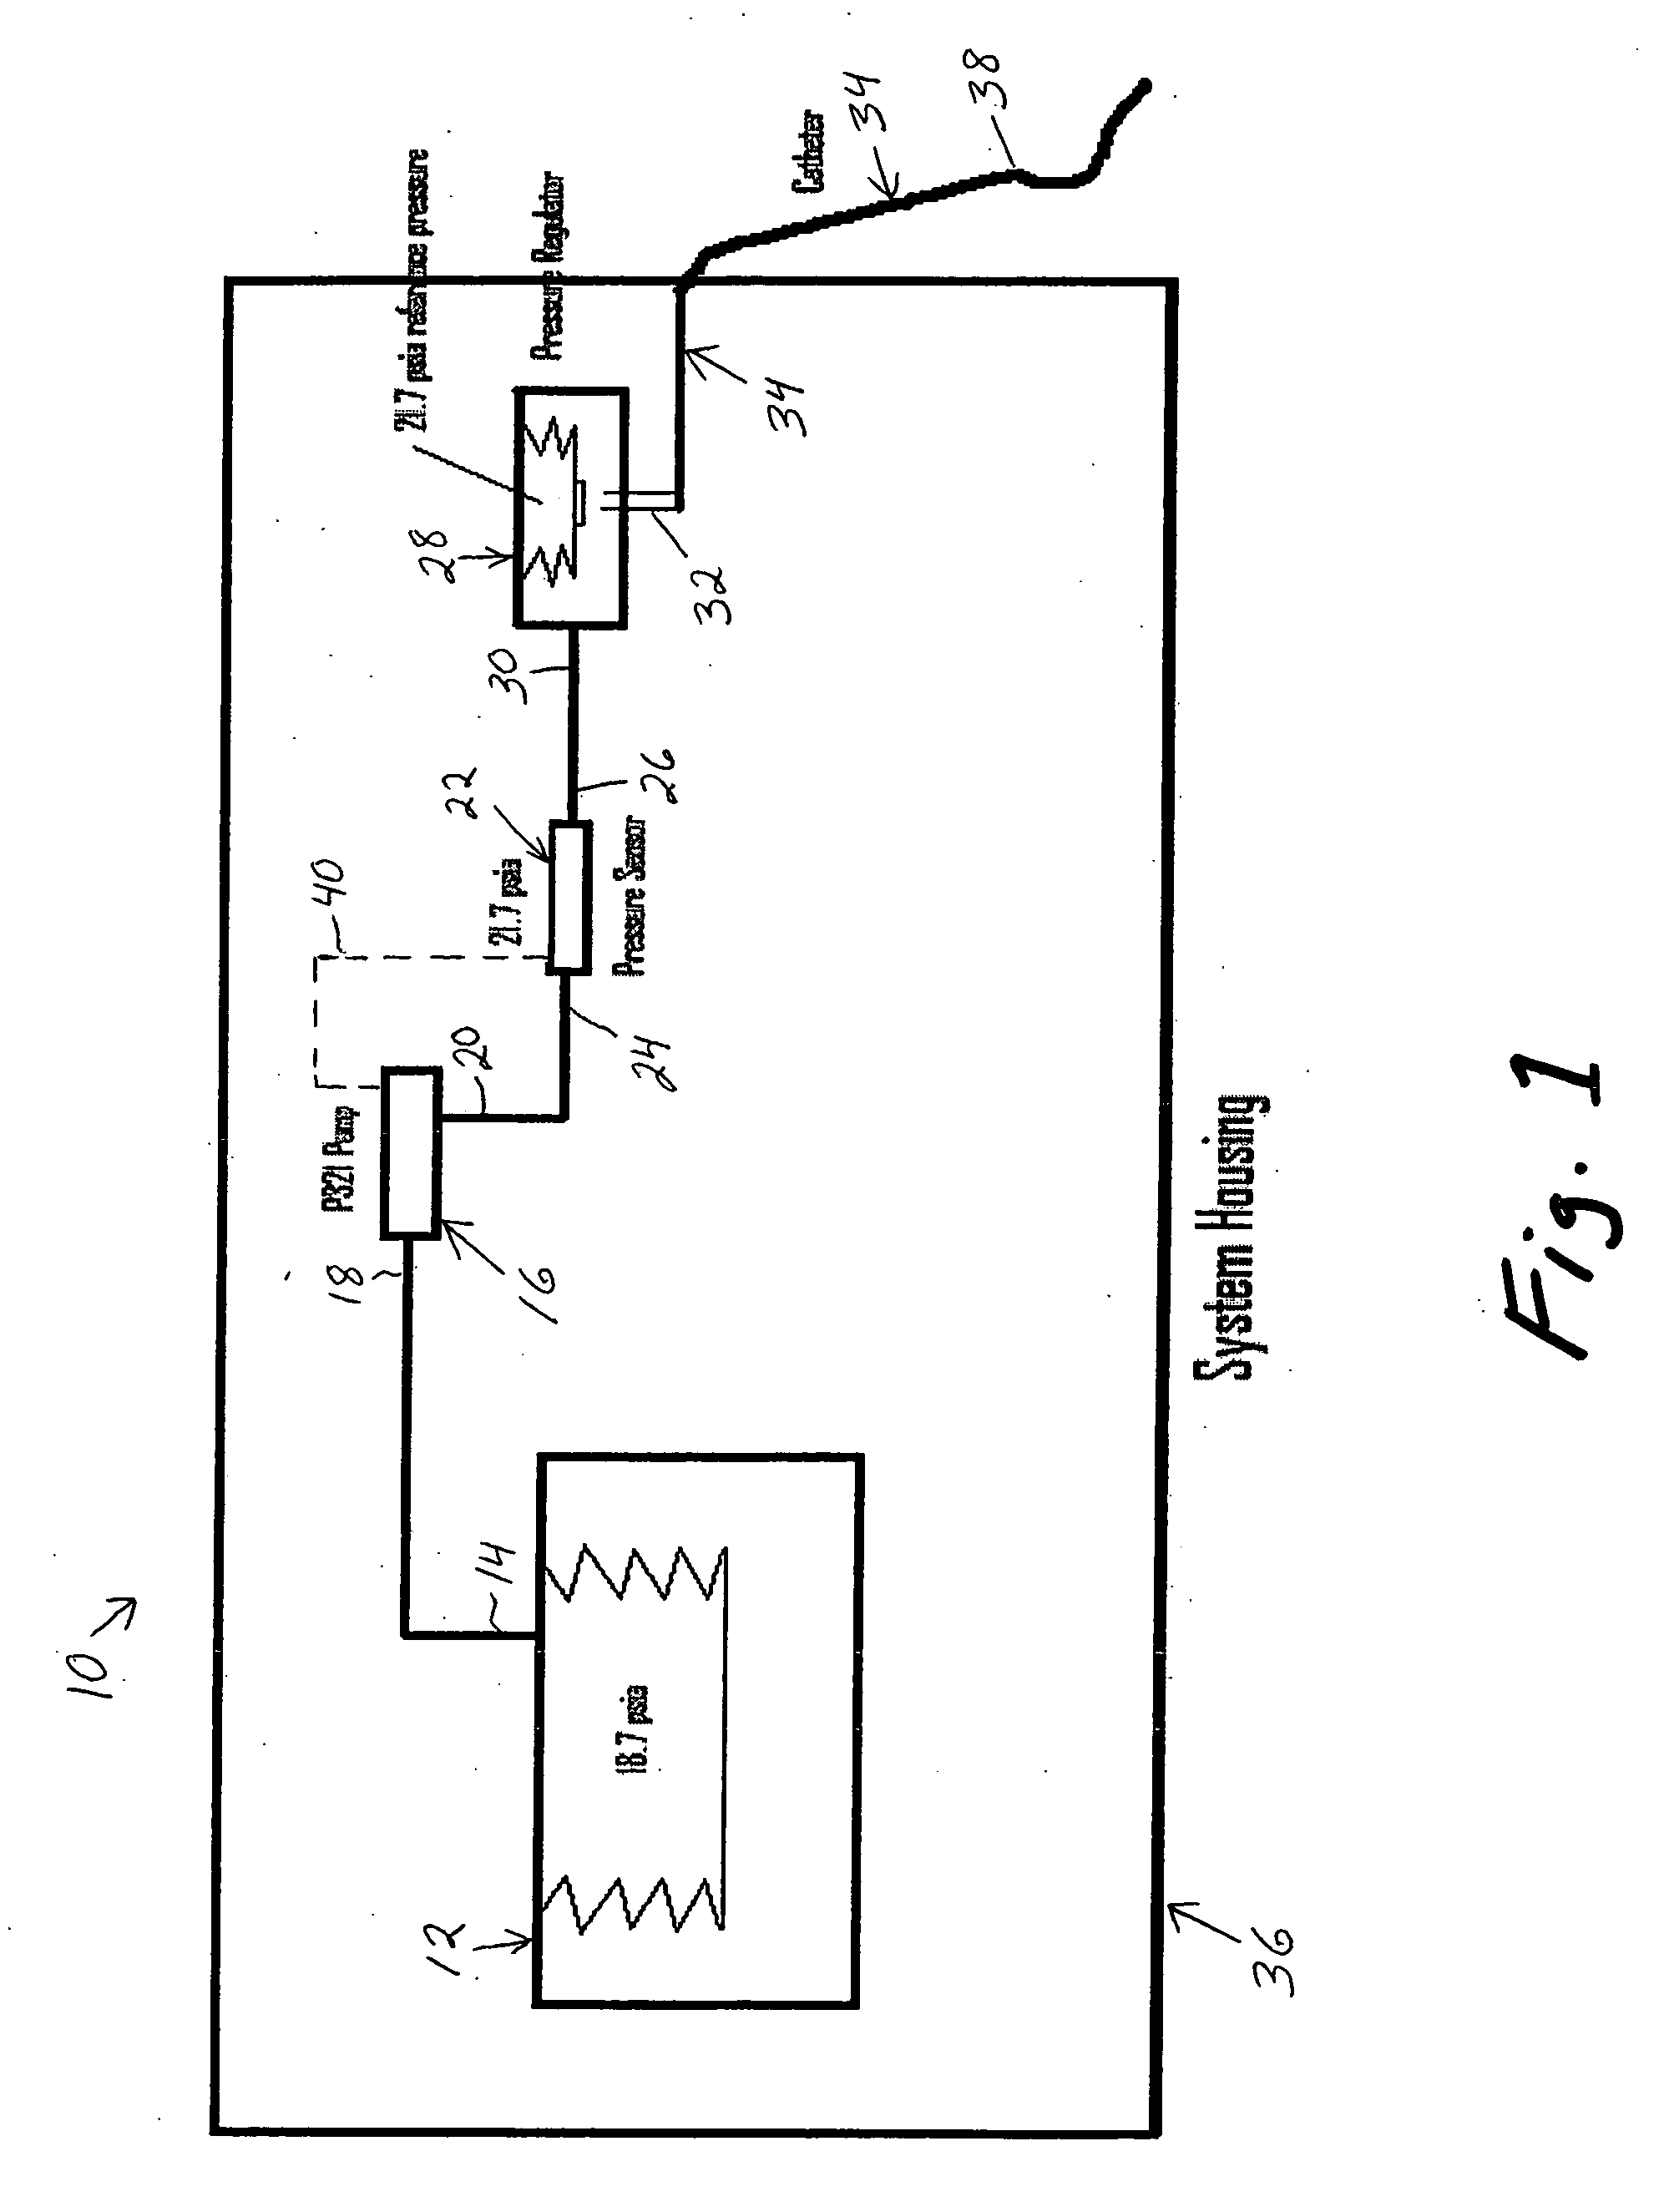 Configuration for drug delivery systems